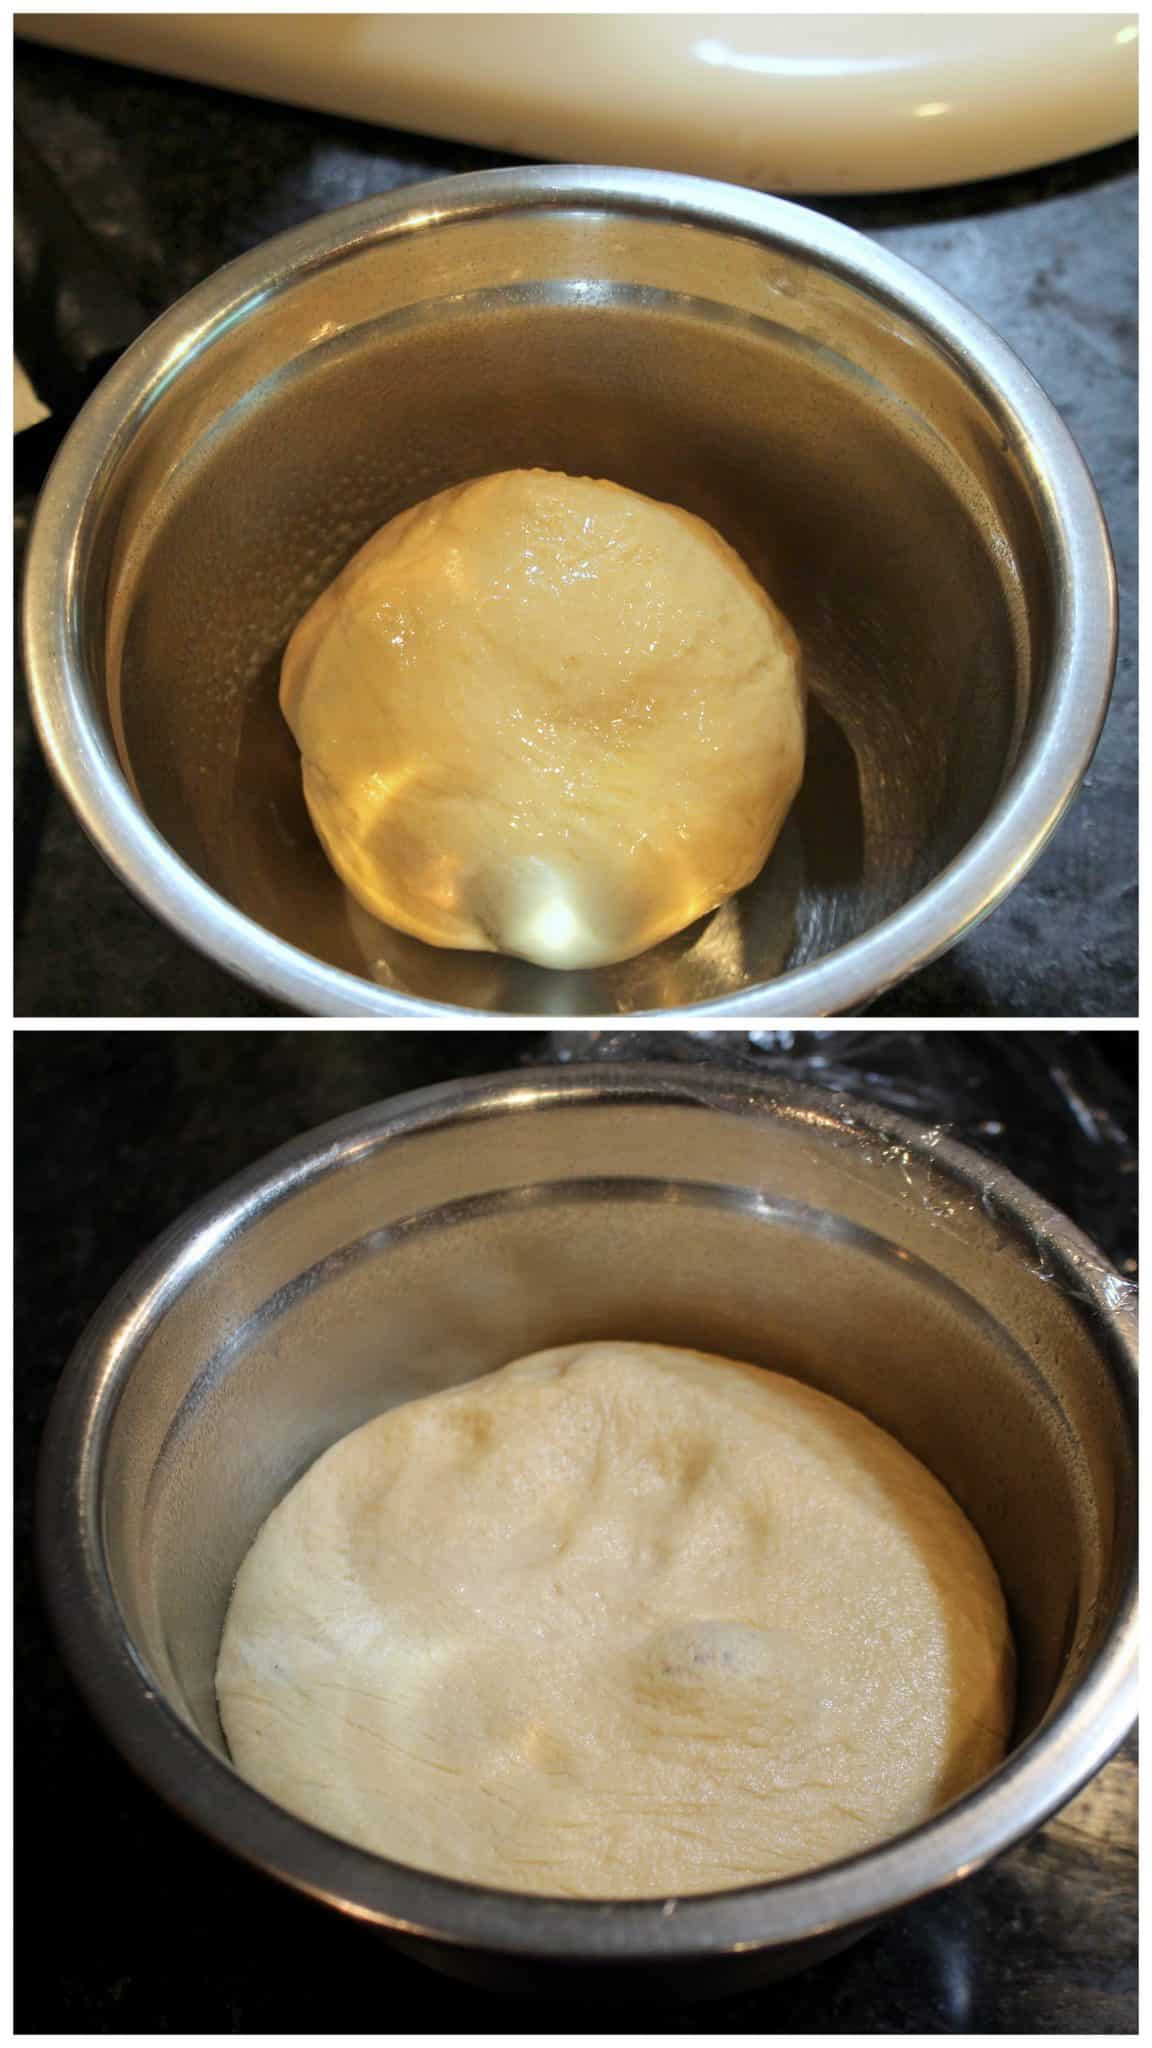 Knead the dough in a bowl and cover with plastic wrap and kitchen towel.